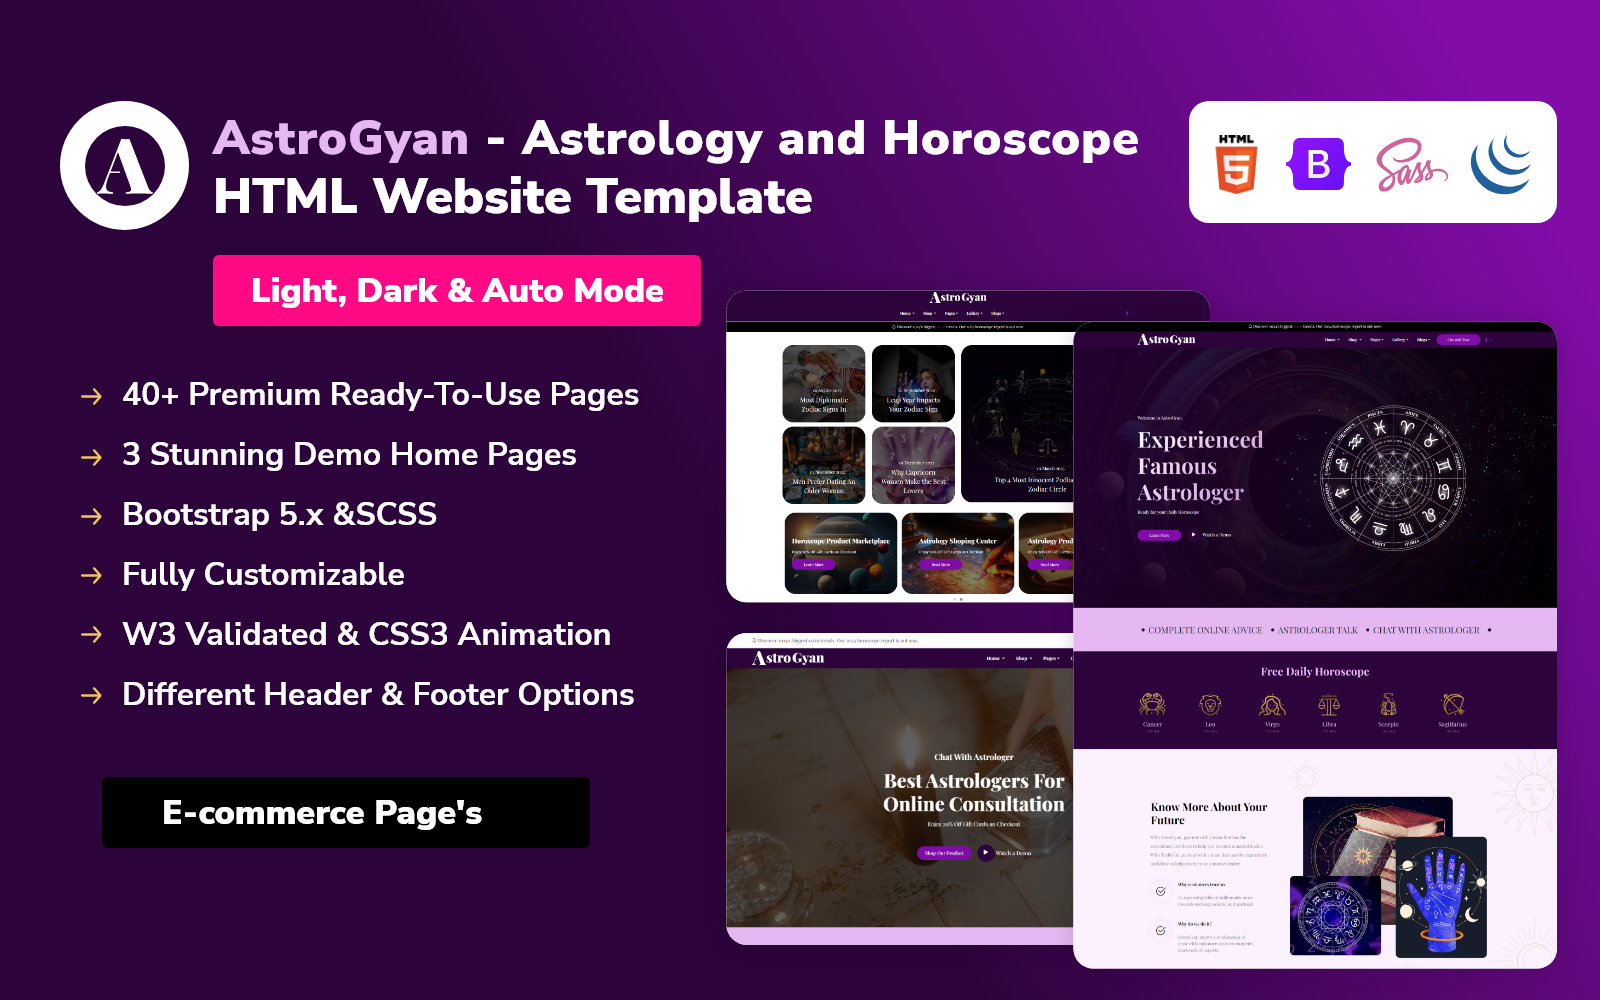 AstroGyan - Astrology and Horoscope HTML Website Template